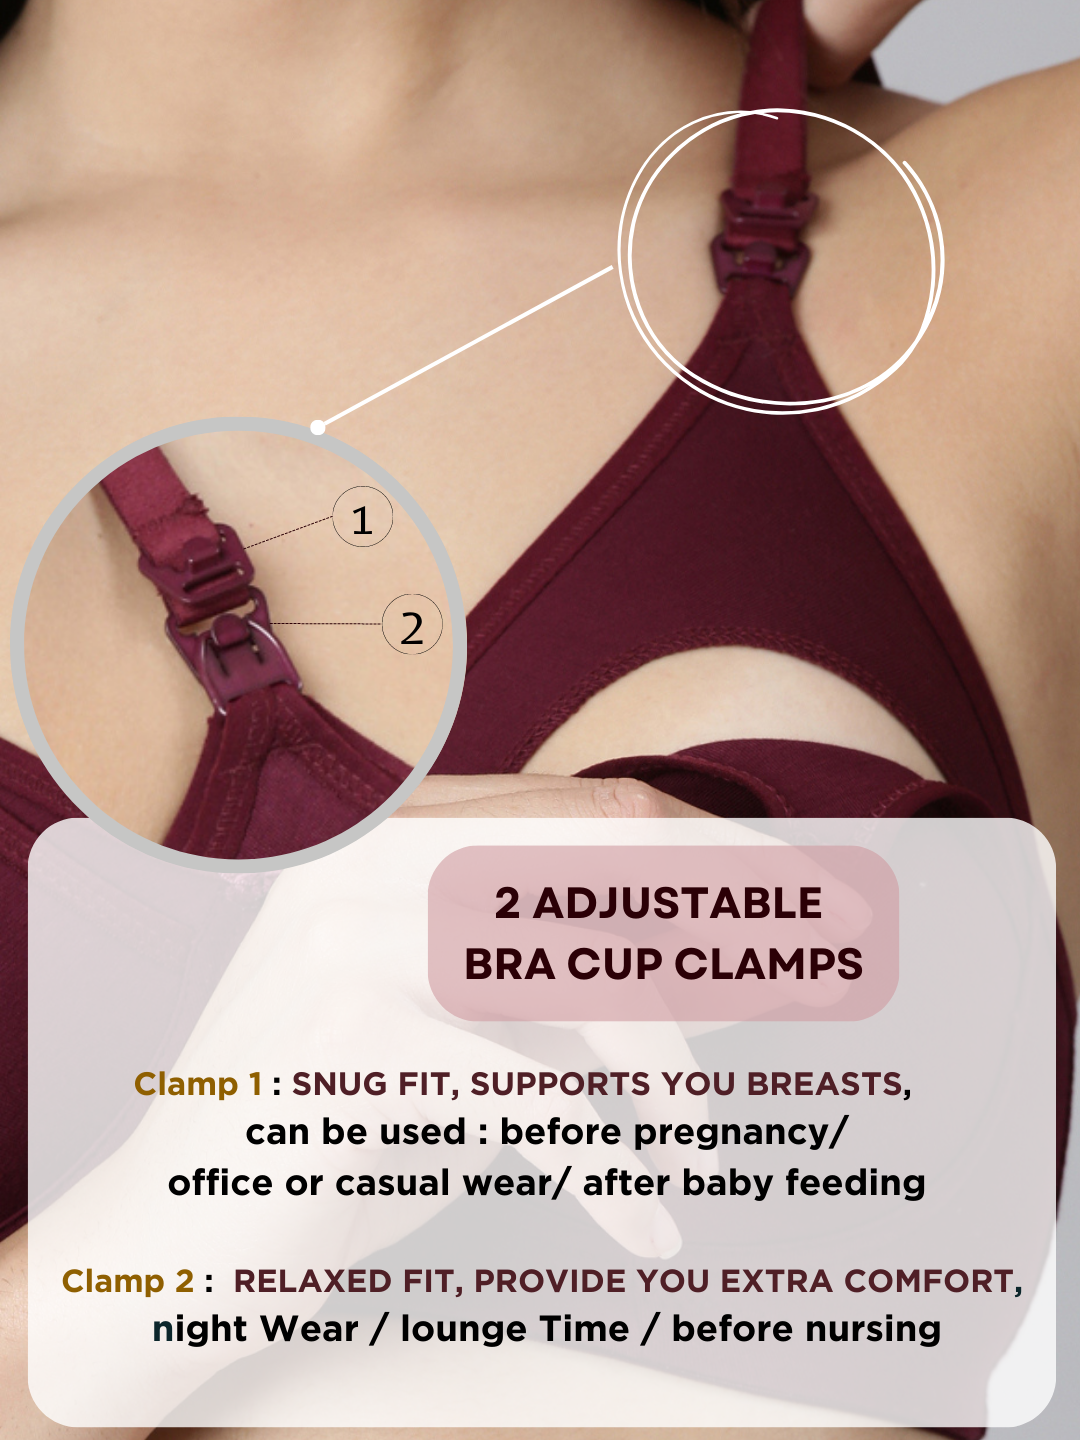 Baby Products Online - New Maternity Breastfeeding Bras Without Hands  Breastfeeding Bra Solid Cotton Hot Pumping Bra Breastfeeding Bra Women Care  Products - Kideno